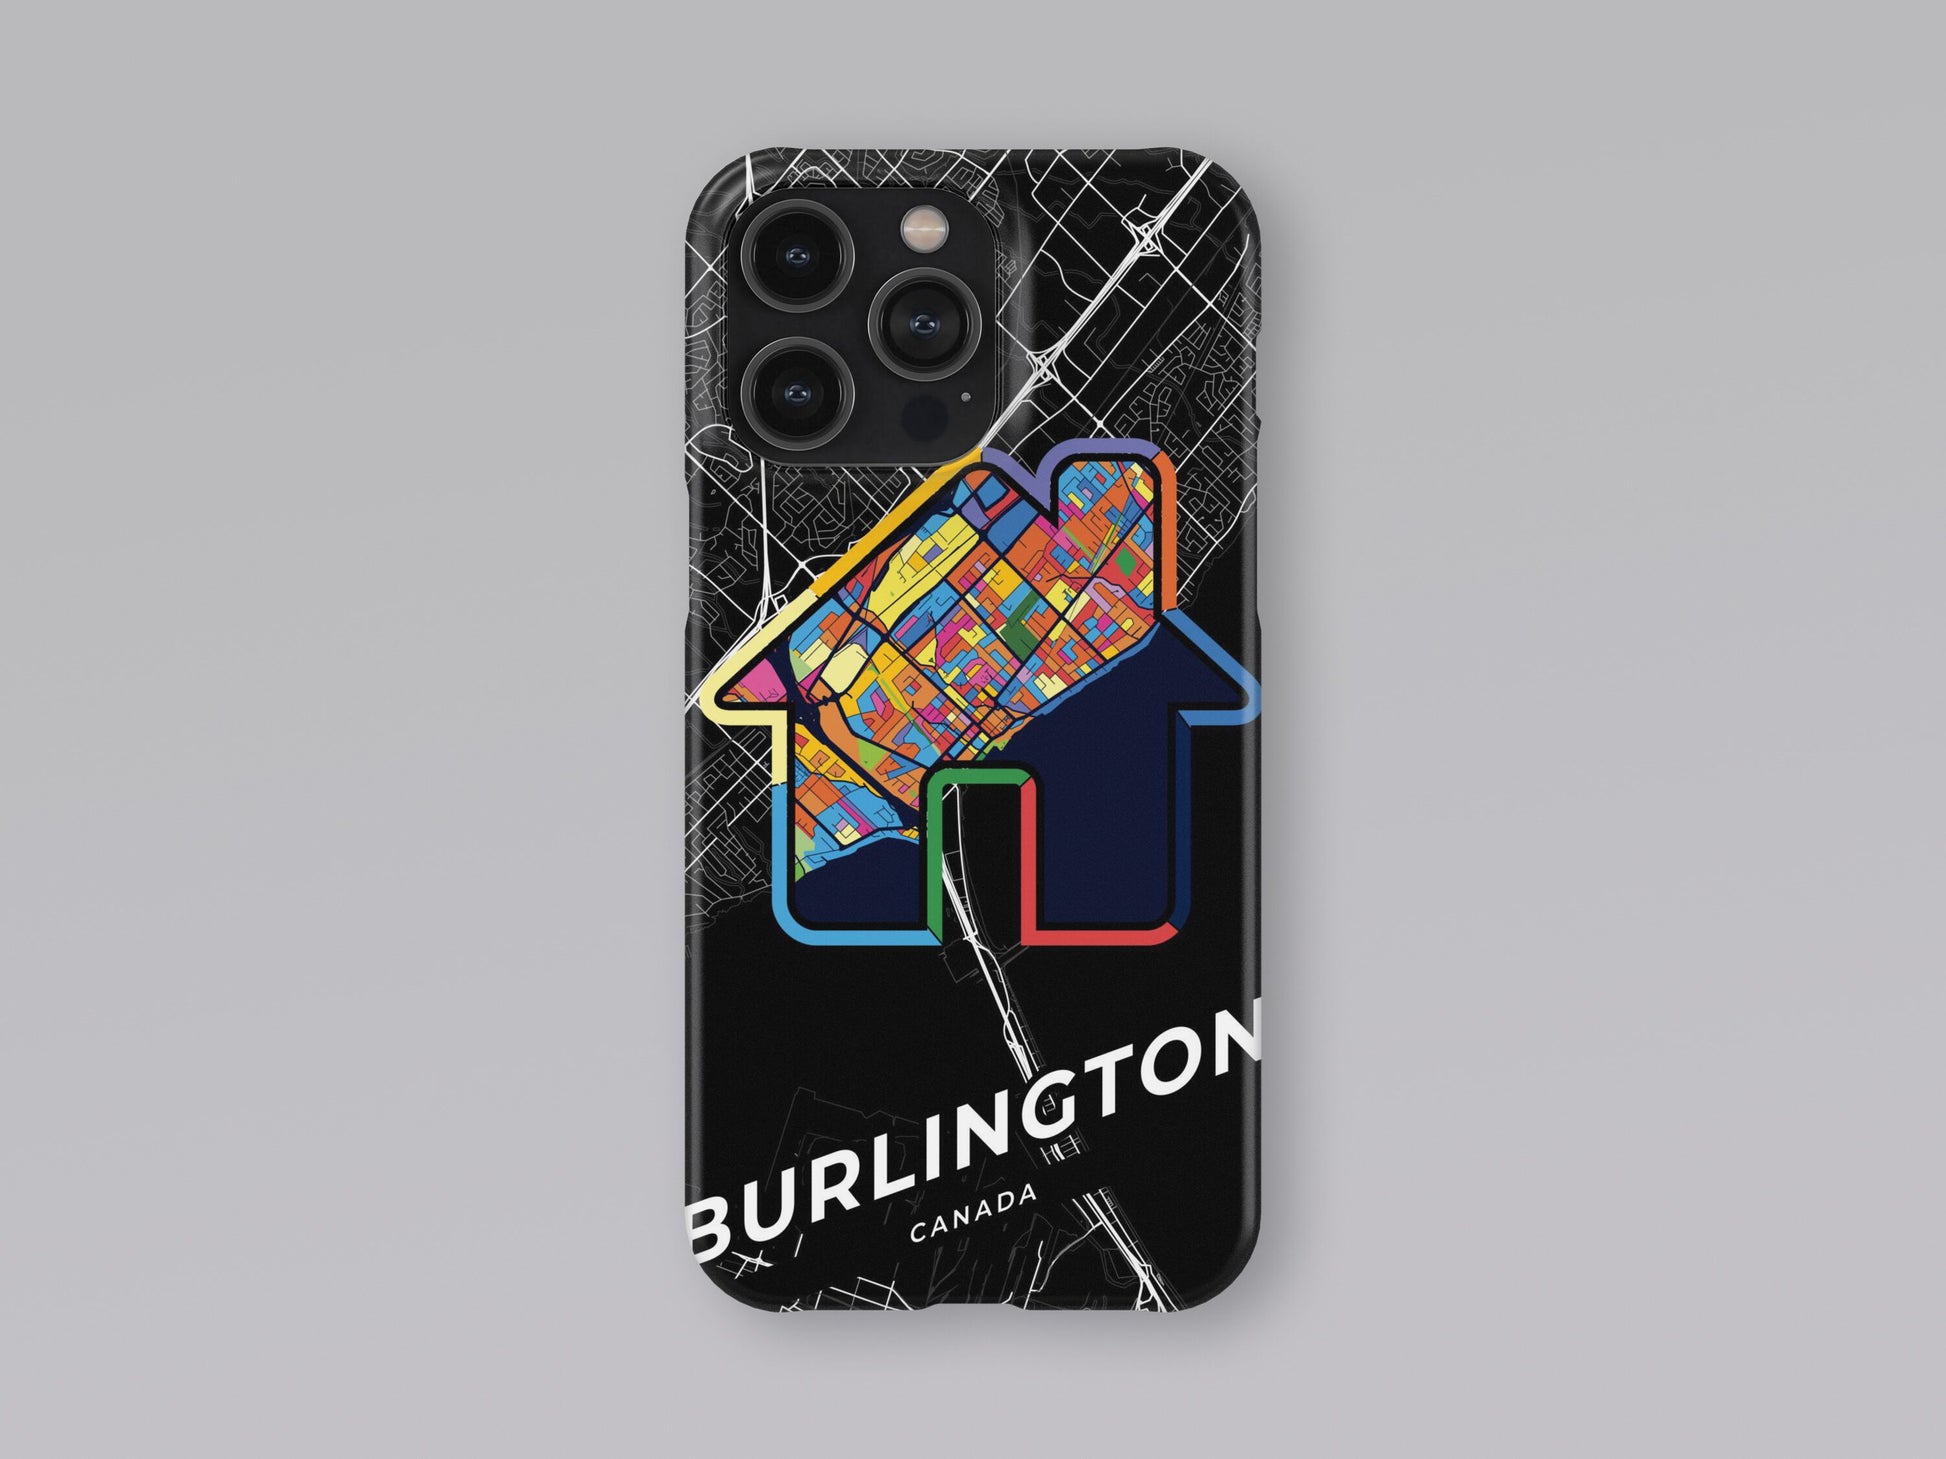 Burlington Canada slim phone case with colorful icon. Birthday, wedding or housewarming gift. Couple match cases. 3